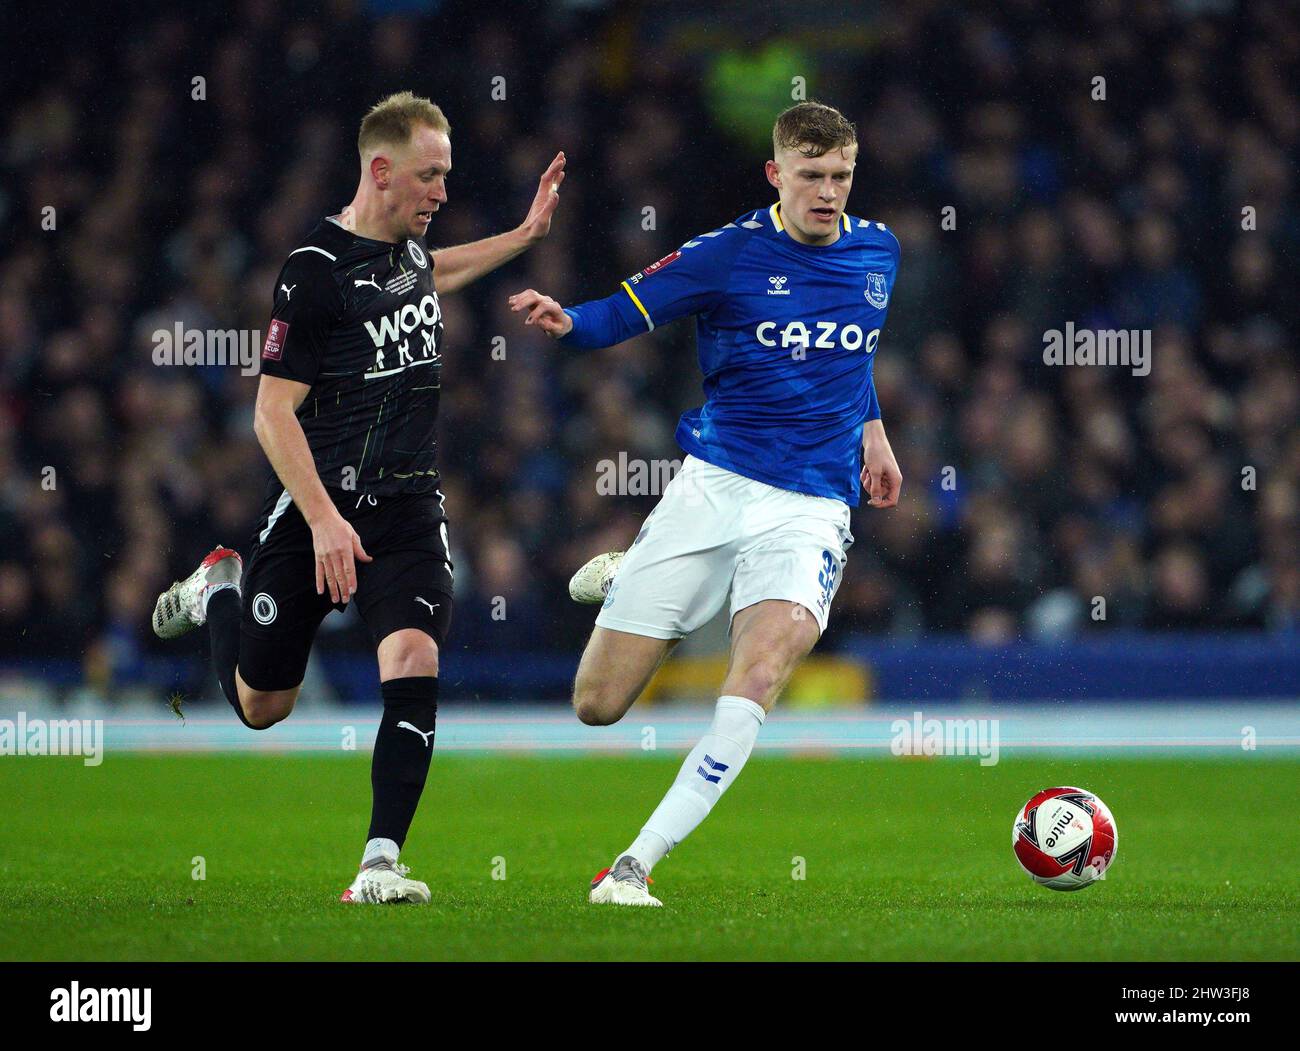 Boreham Wood's Scott Boden (left) and Everton's Jarrad Branthwaite battle for the ball during the Emirates FA Cup fifth round match at Goodison Park, Liverpool. Picture date: Thursday March 3, 2022. Stock Photo